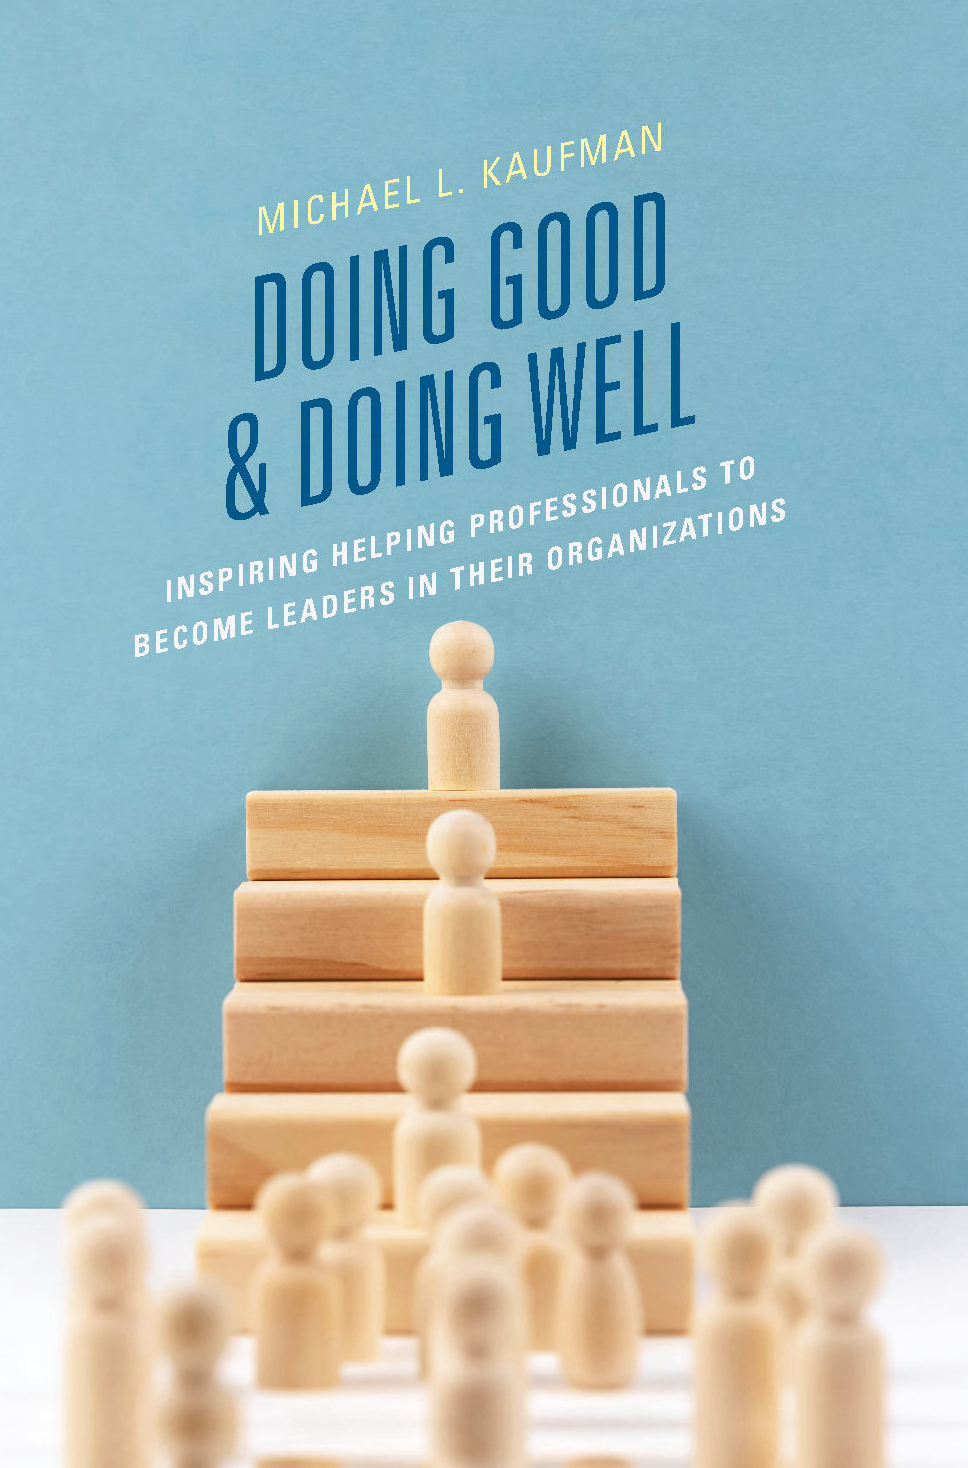 Doing Good & Doing Well by Michael L. Kaufman, PhD, MSW  (Credit MLK)